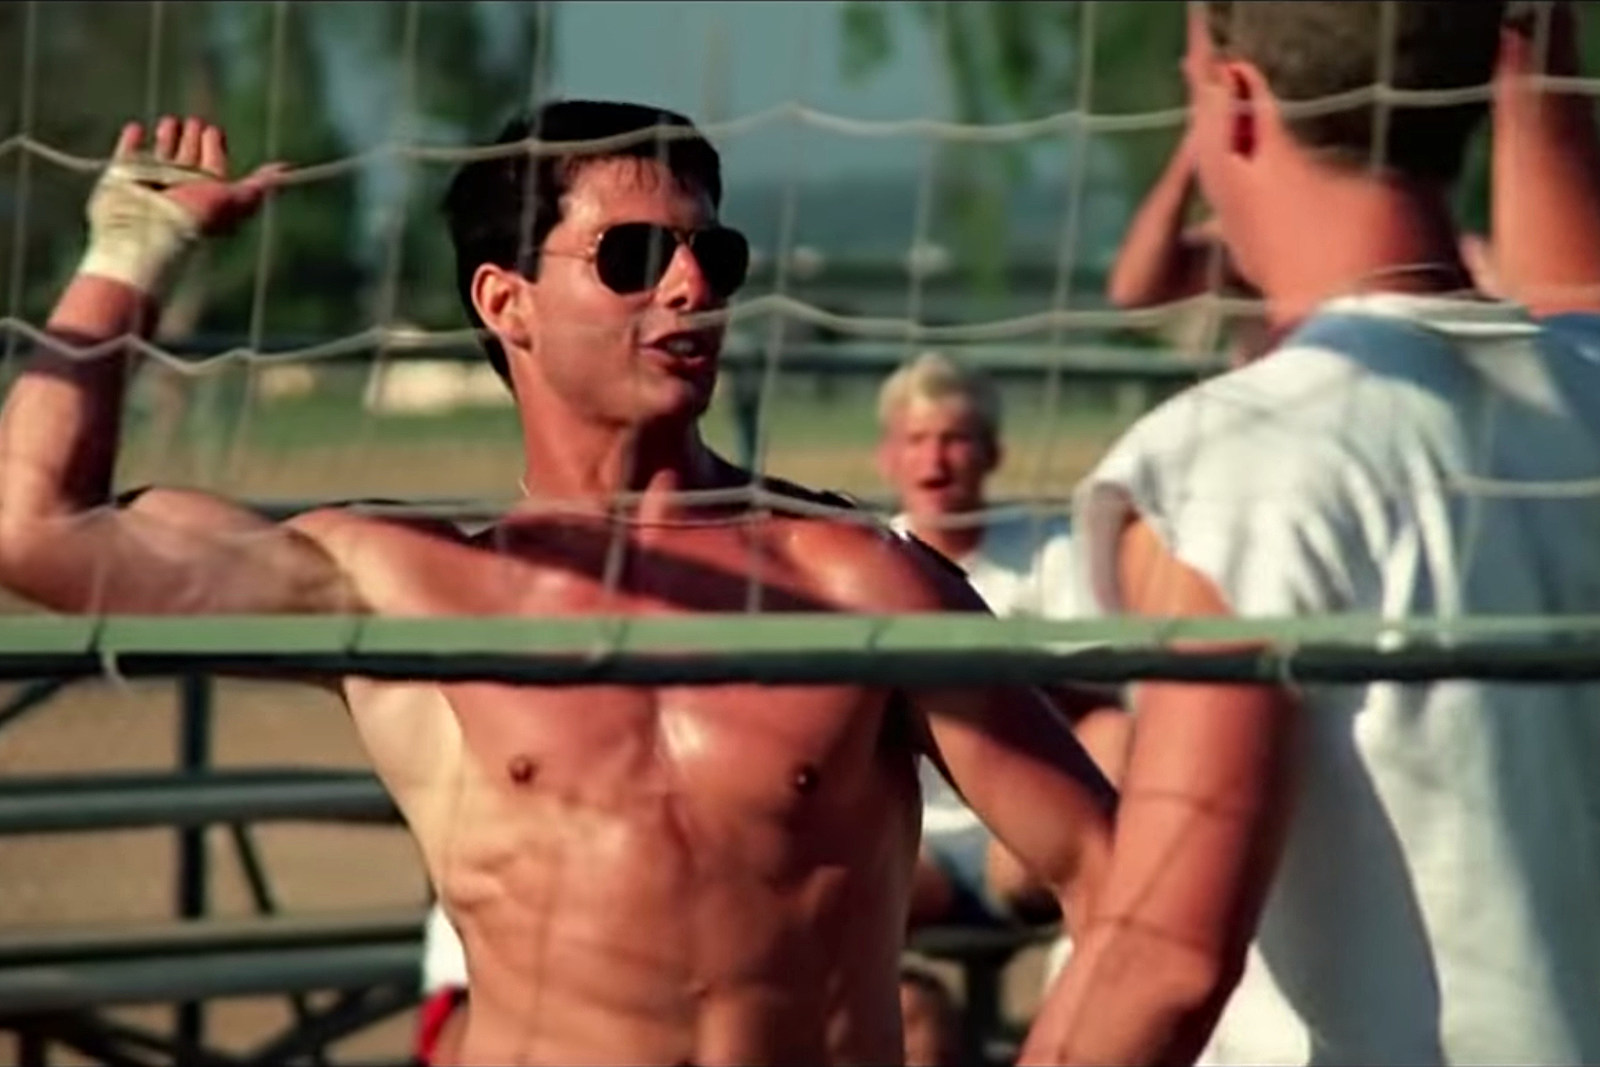 Top Guns Full Porn - Why 'Top Gun' Features That 'Soft Porn' Volleyball Scene